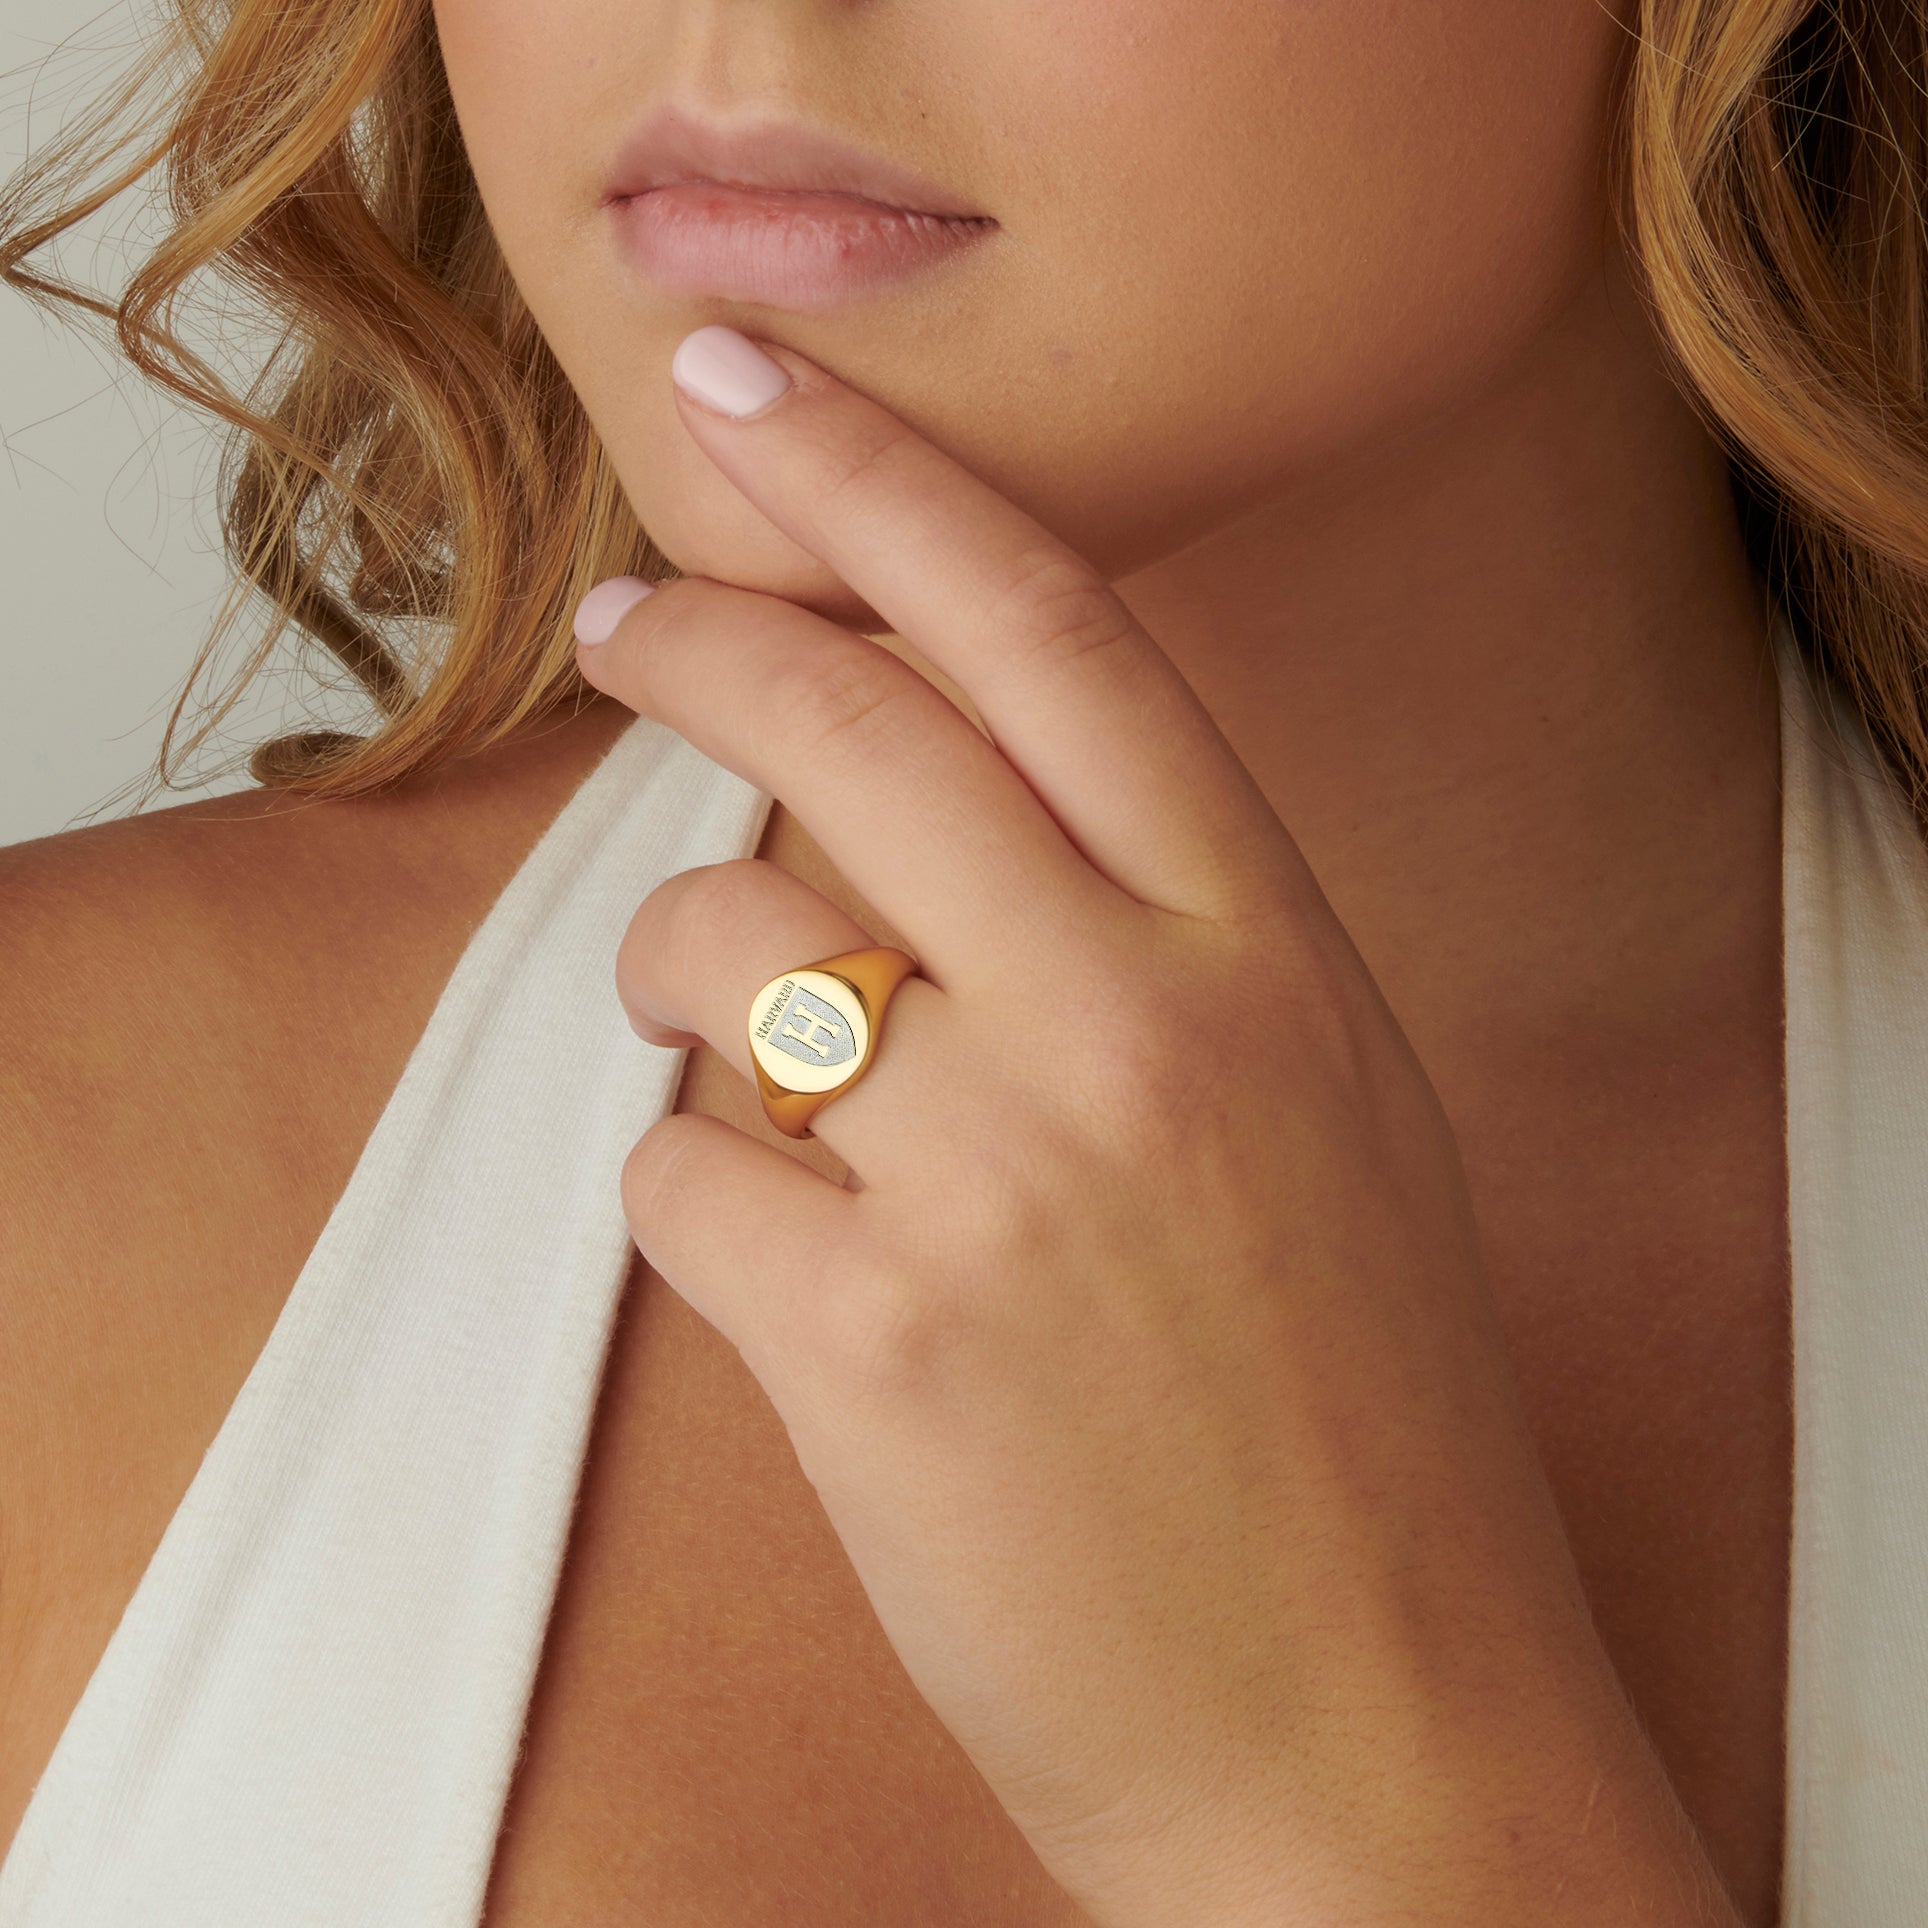 Harvard Ivy Signet Class Ring in Gold Vermeil worn by a woman